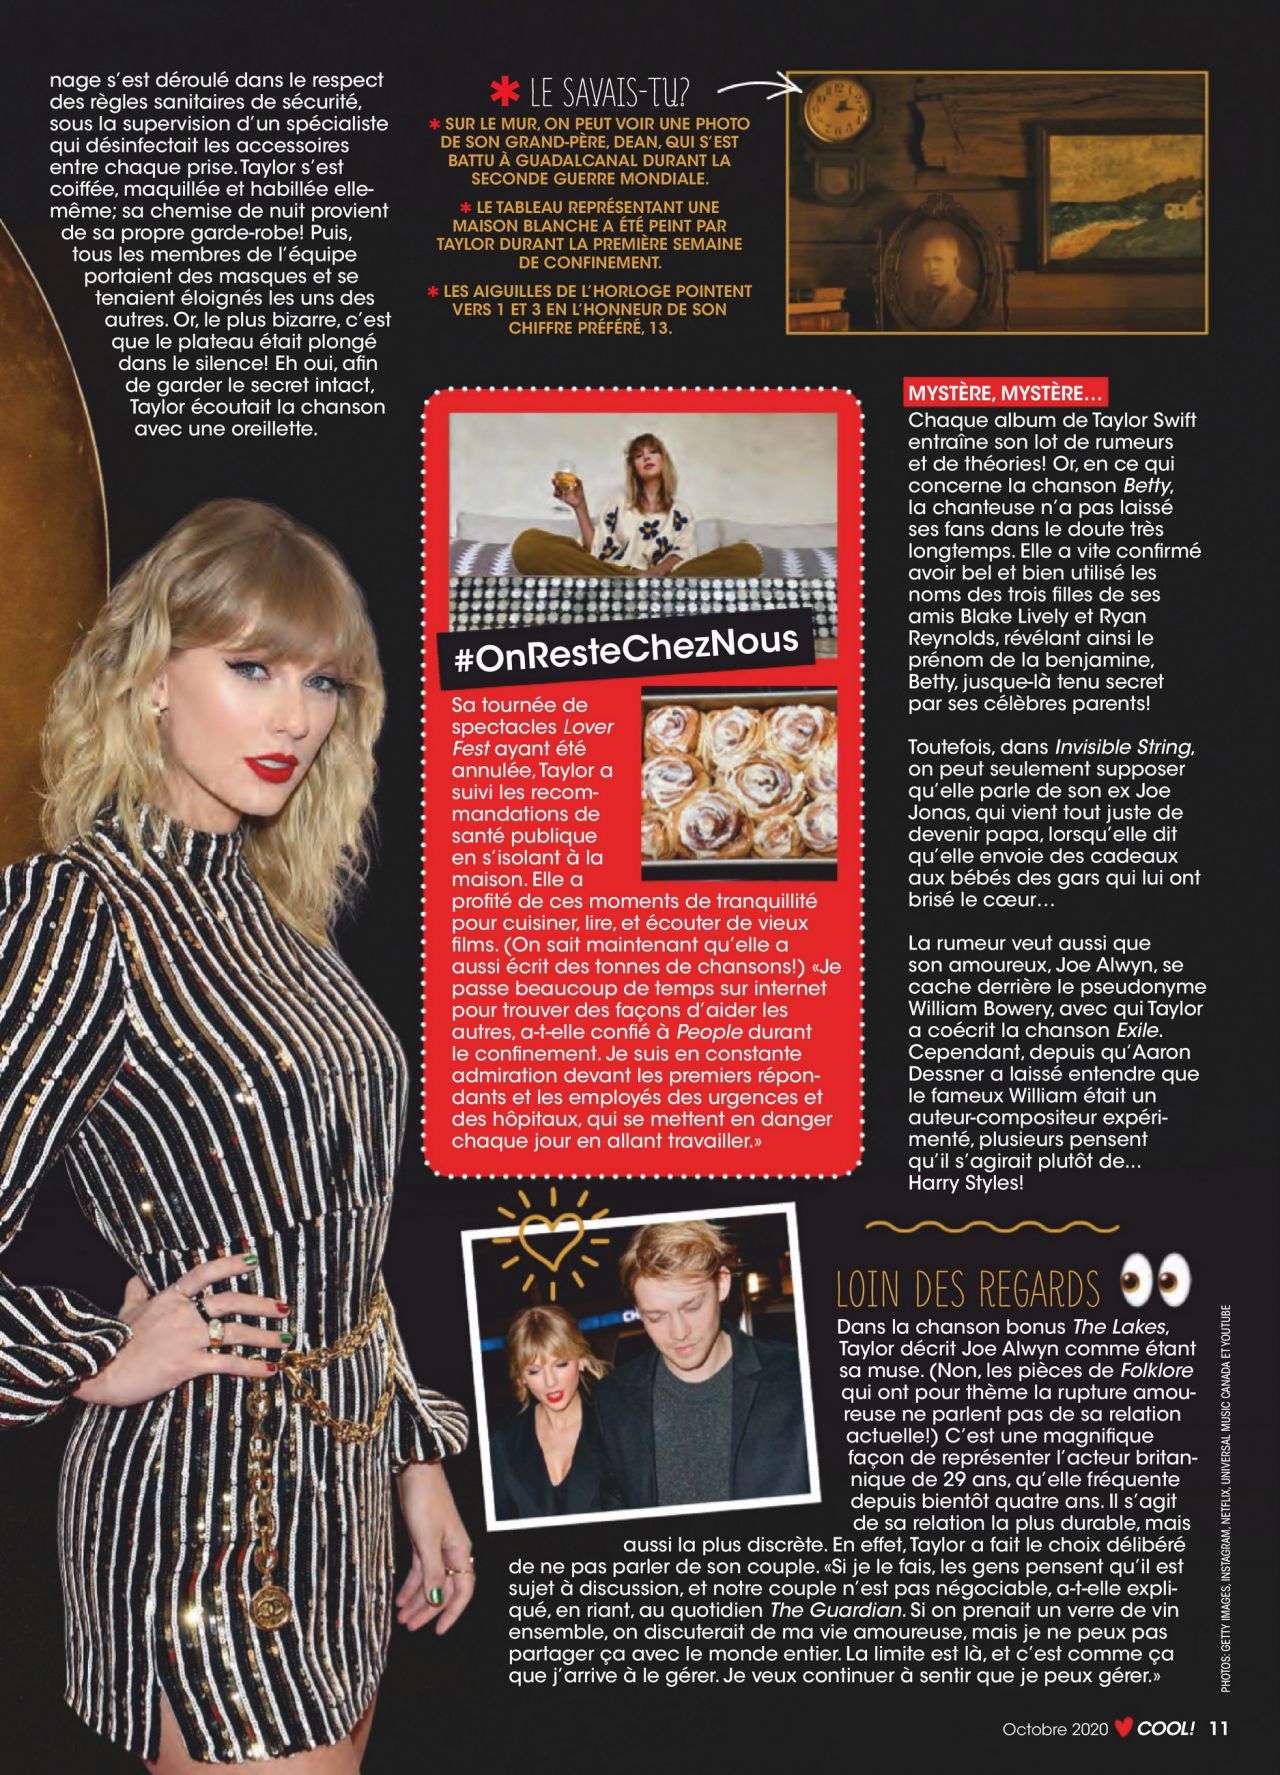 taylor-swift-cool-canada-october-2020-issue-2.jpg